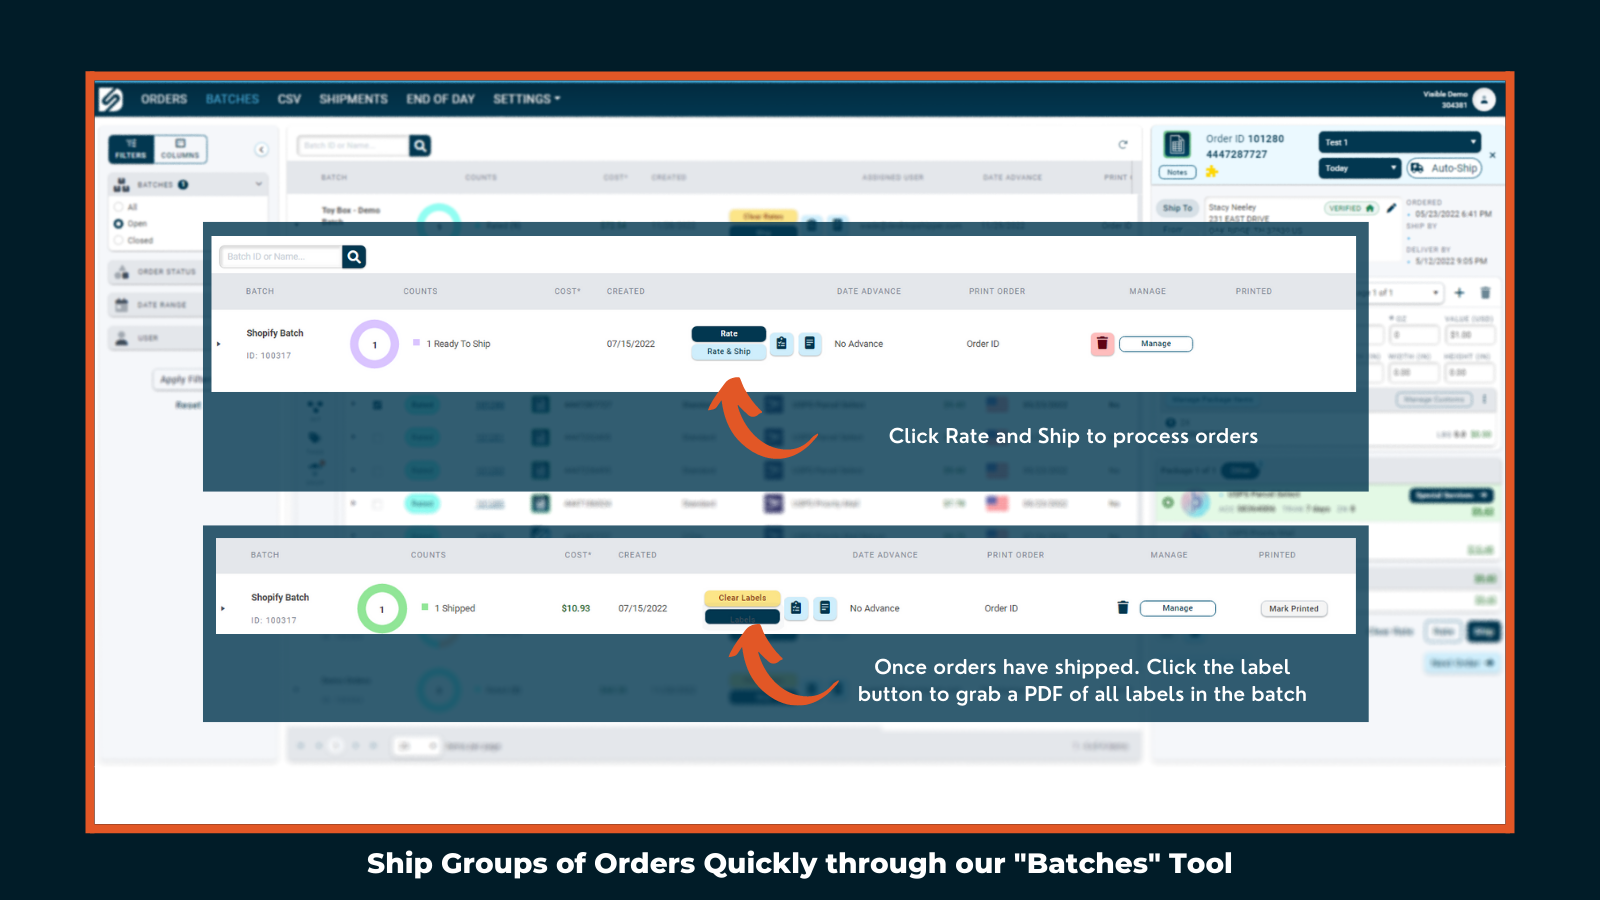 Ship groups of Orders the quickest through our batching tool